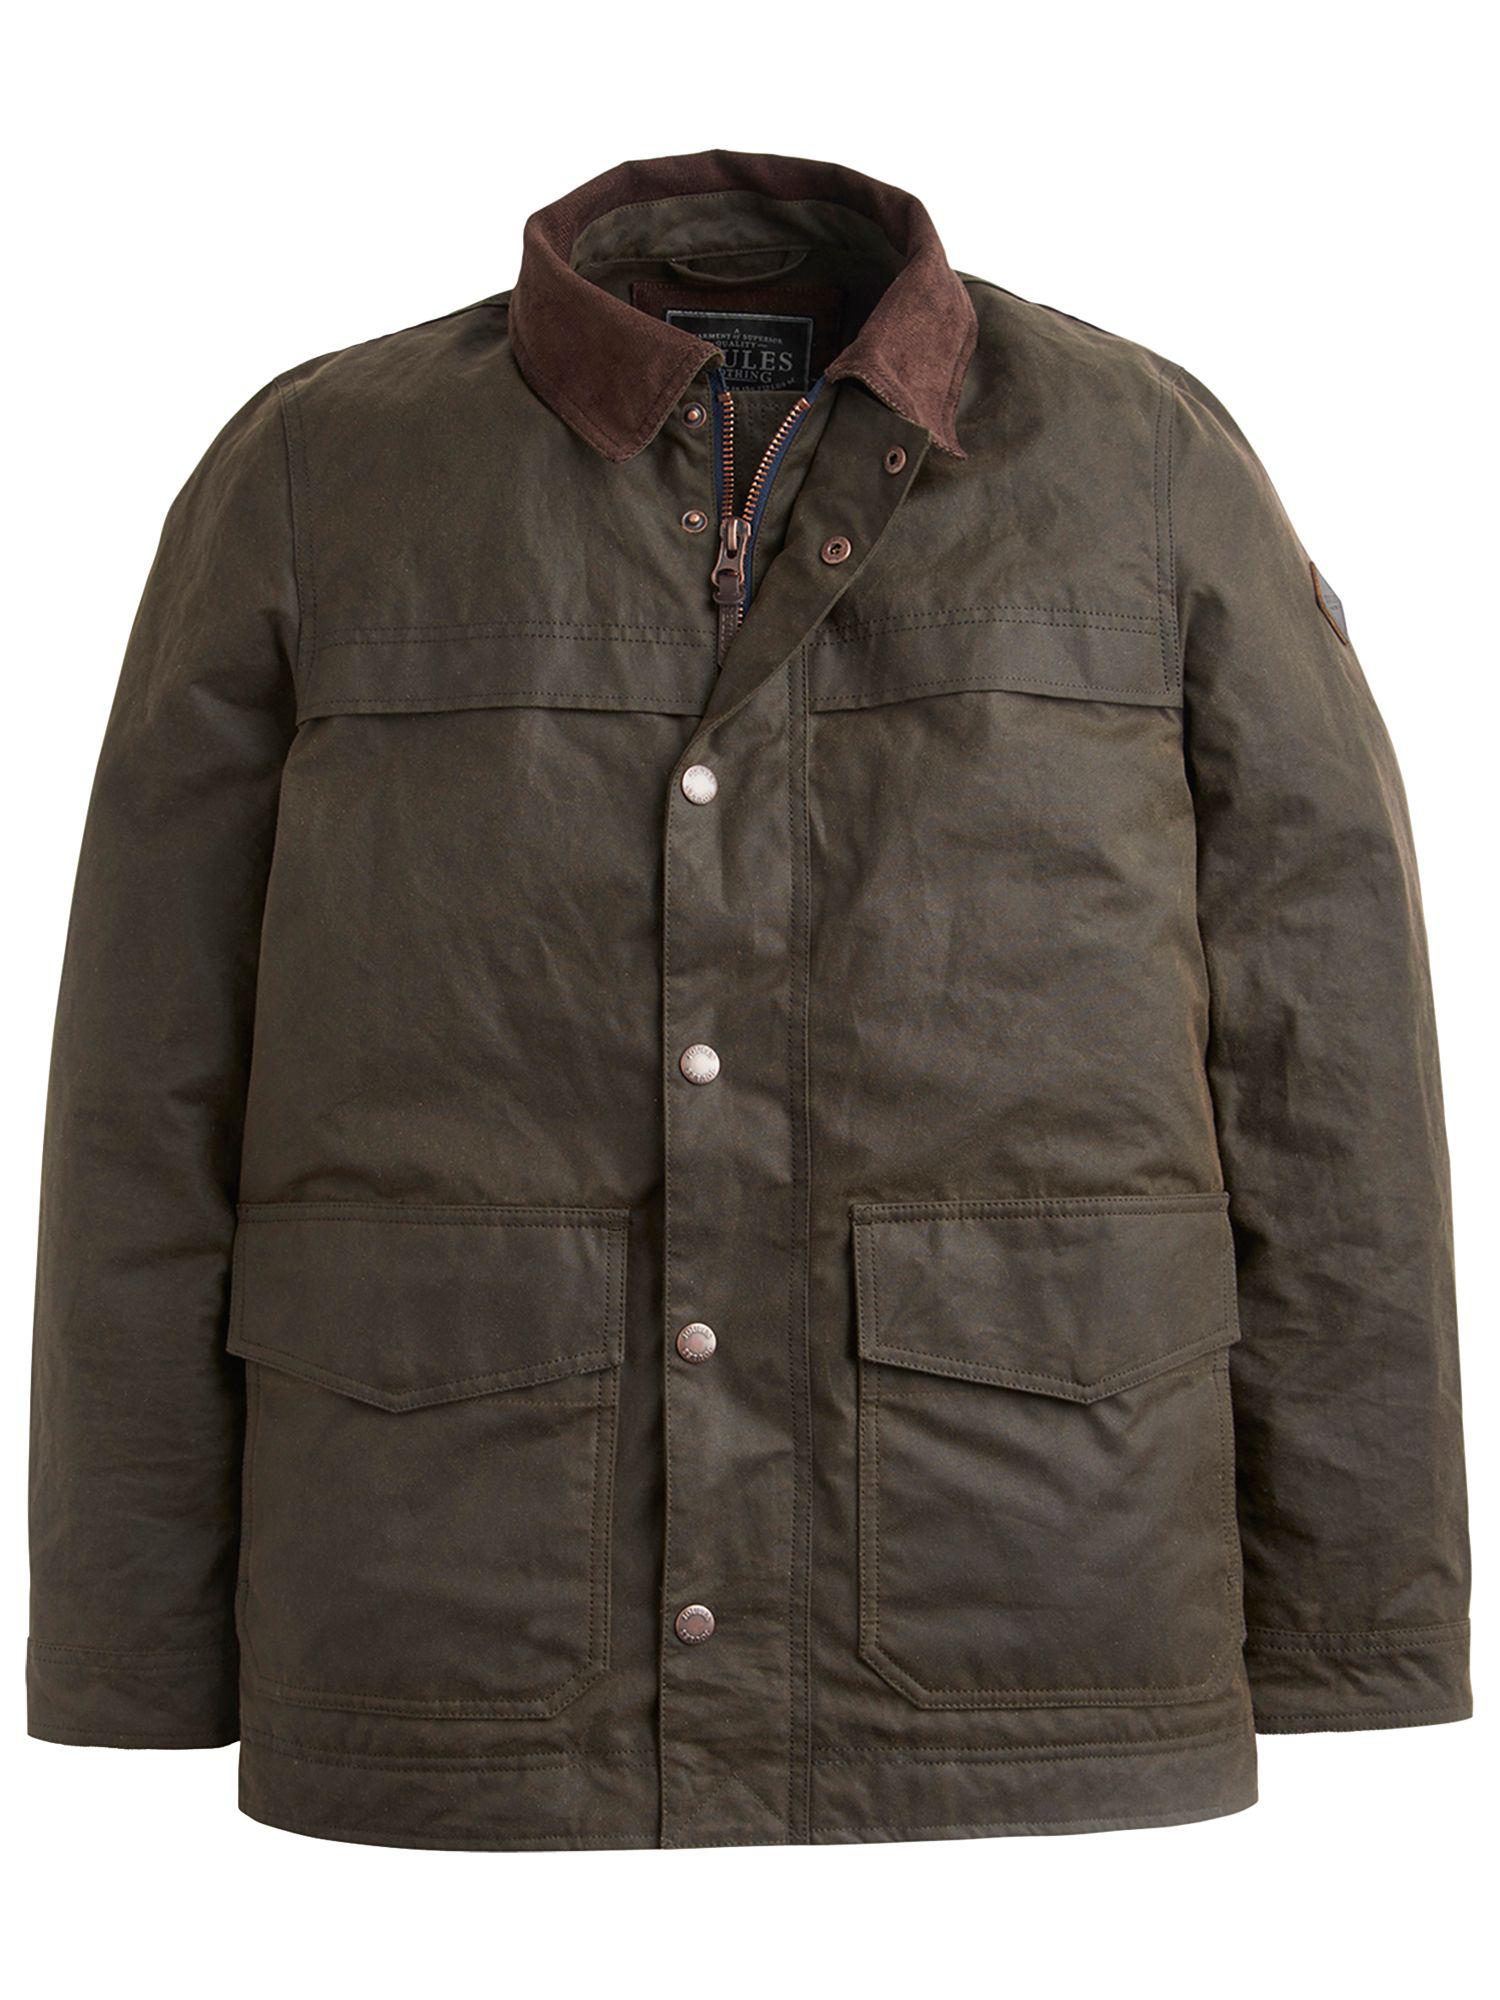 Joules Cotton Halley Stevenson Wax Jacket in Olive (Green) for Men - Lyst